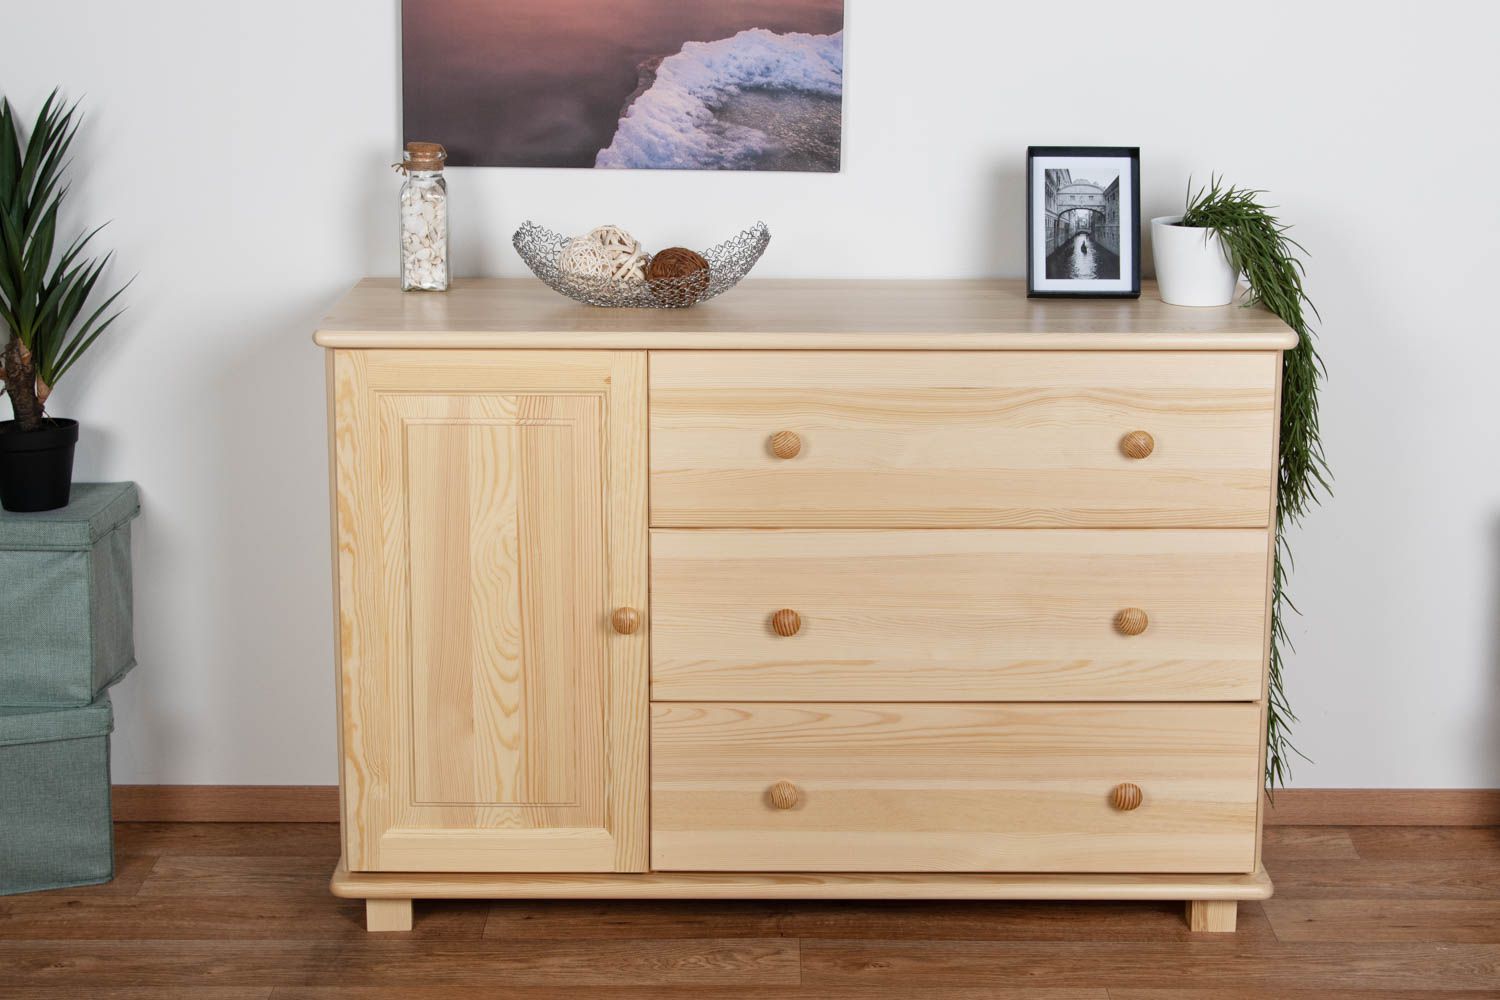 Chest of drawers solid pine solid wood natural 037 - Dimensions 78 x 118 x 42 cm (H x W x D)